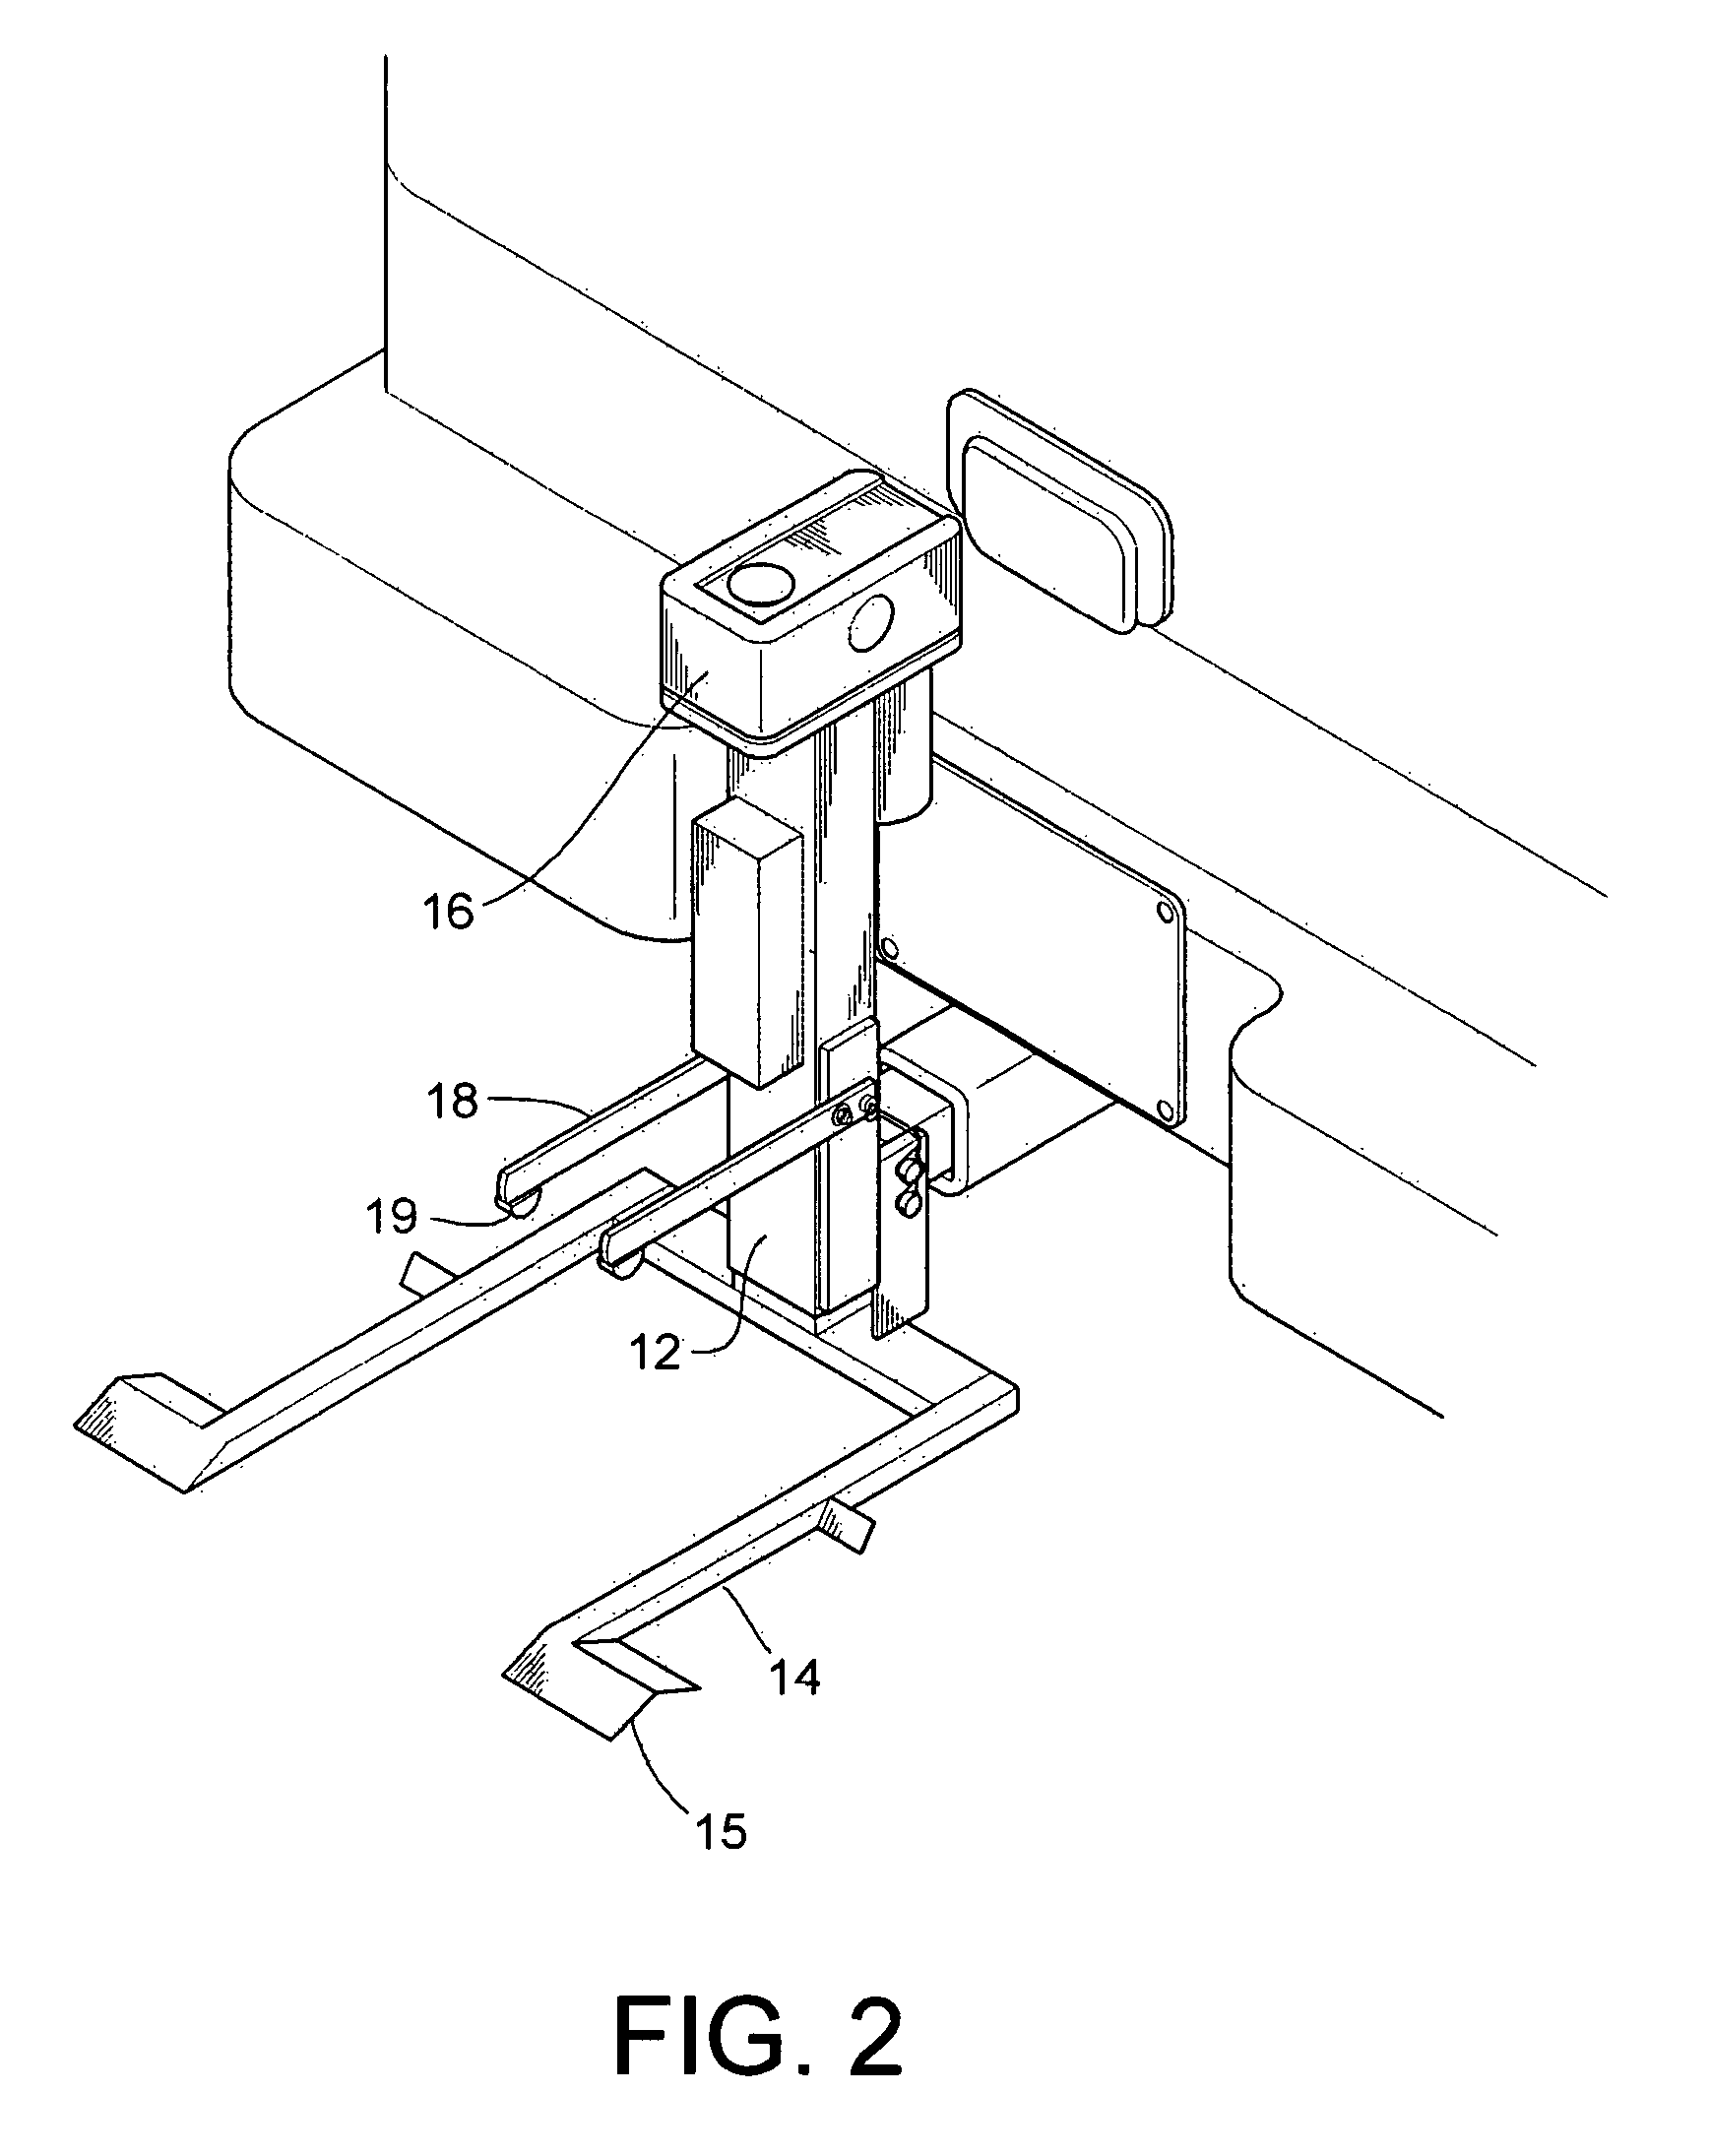 Hitch-mounted cargo lift for personal mobility device